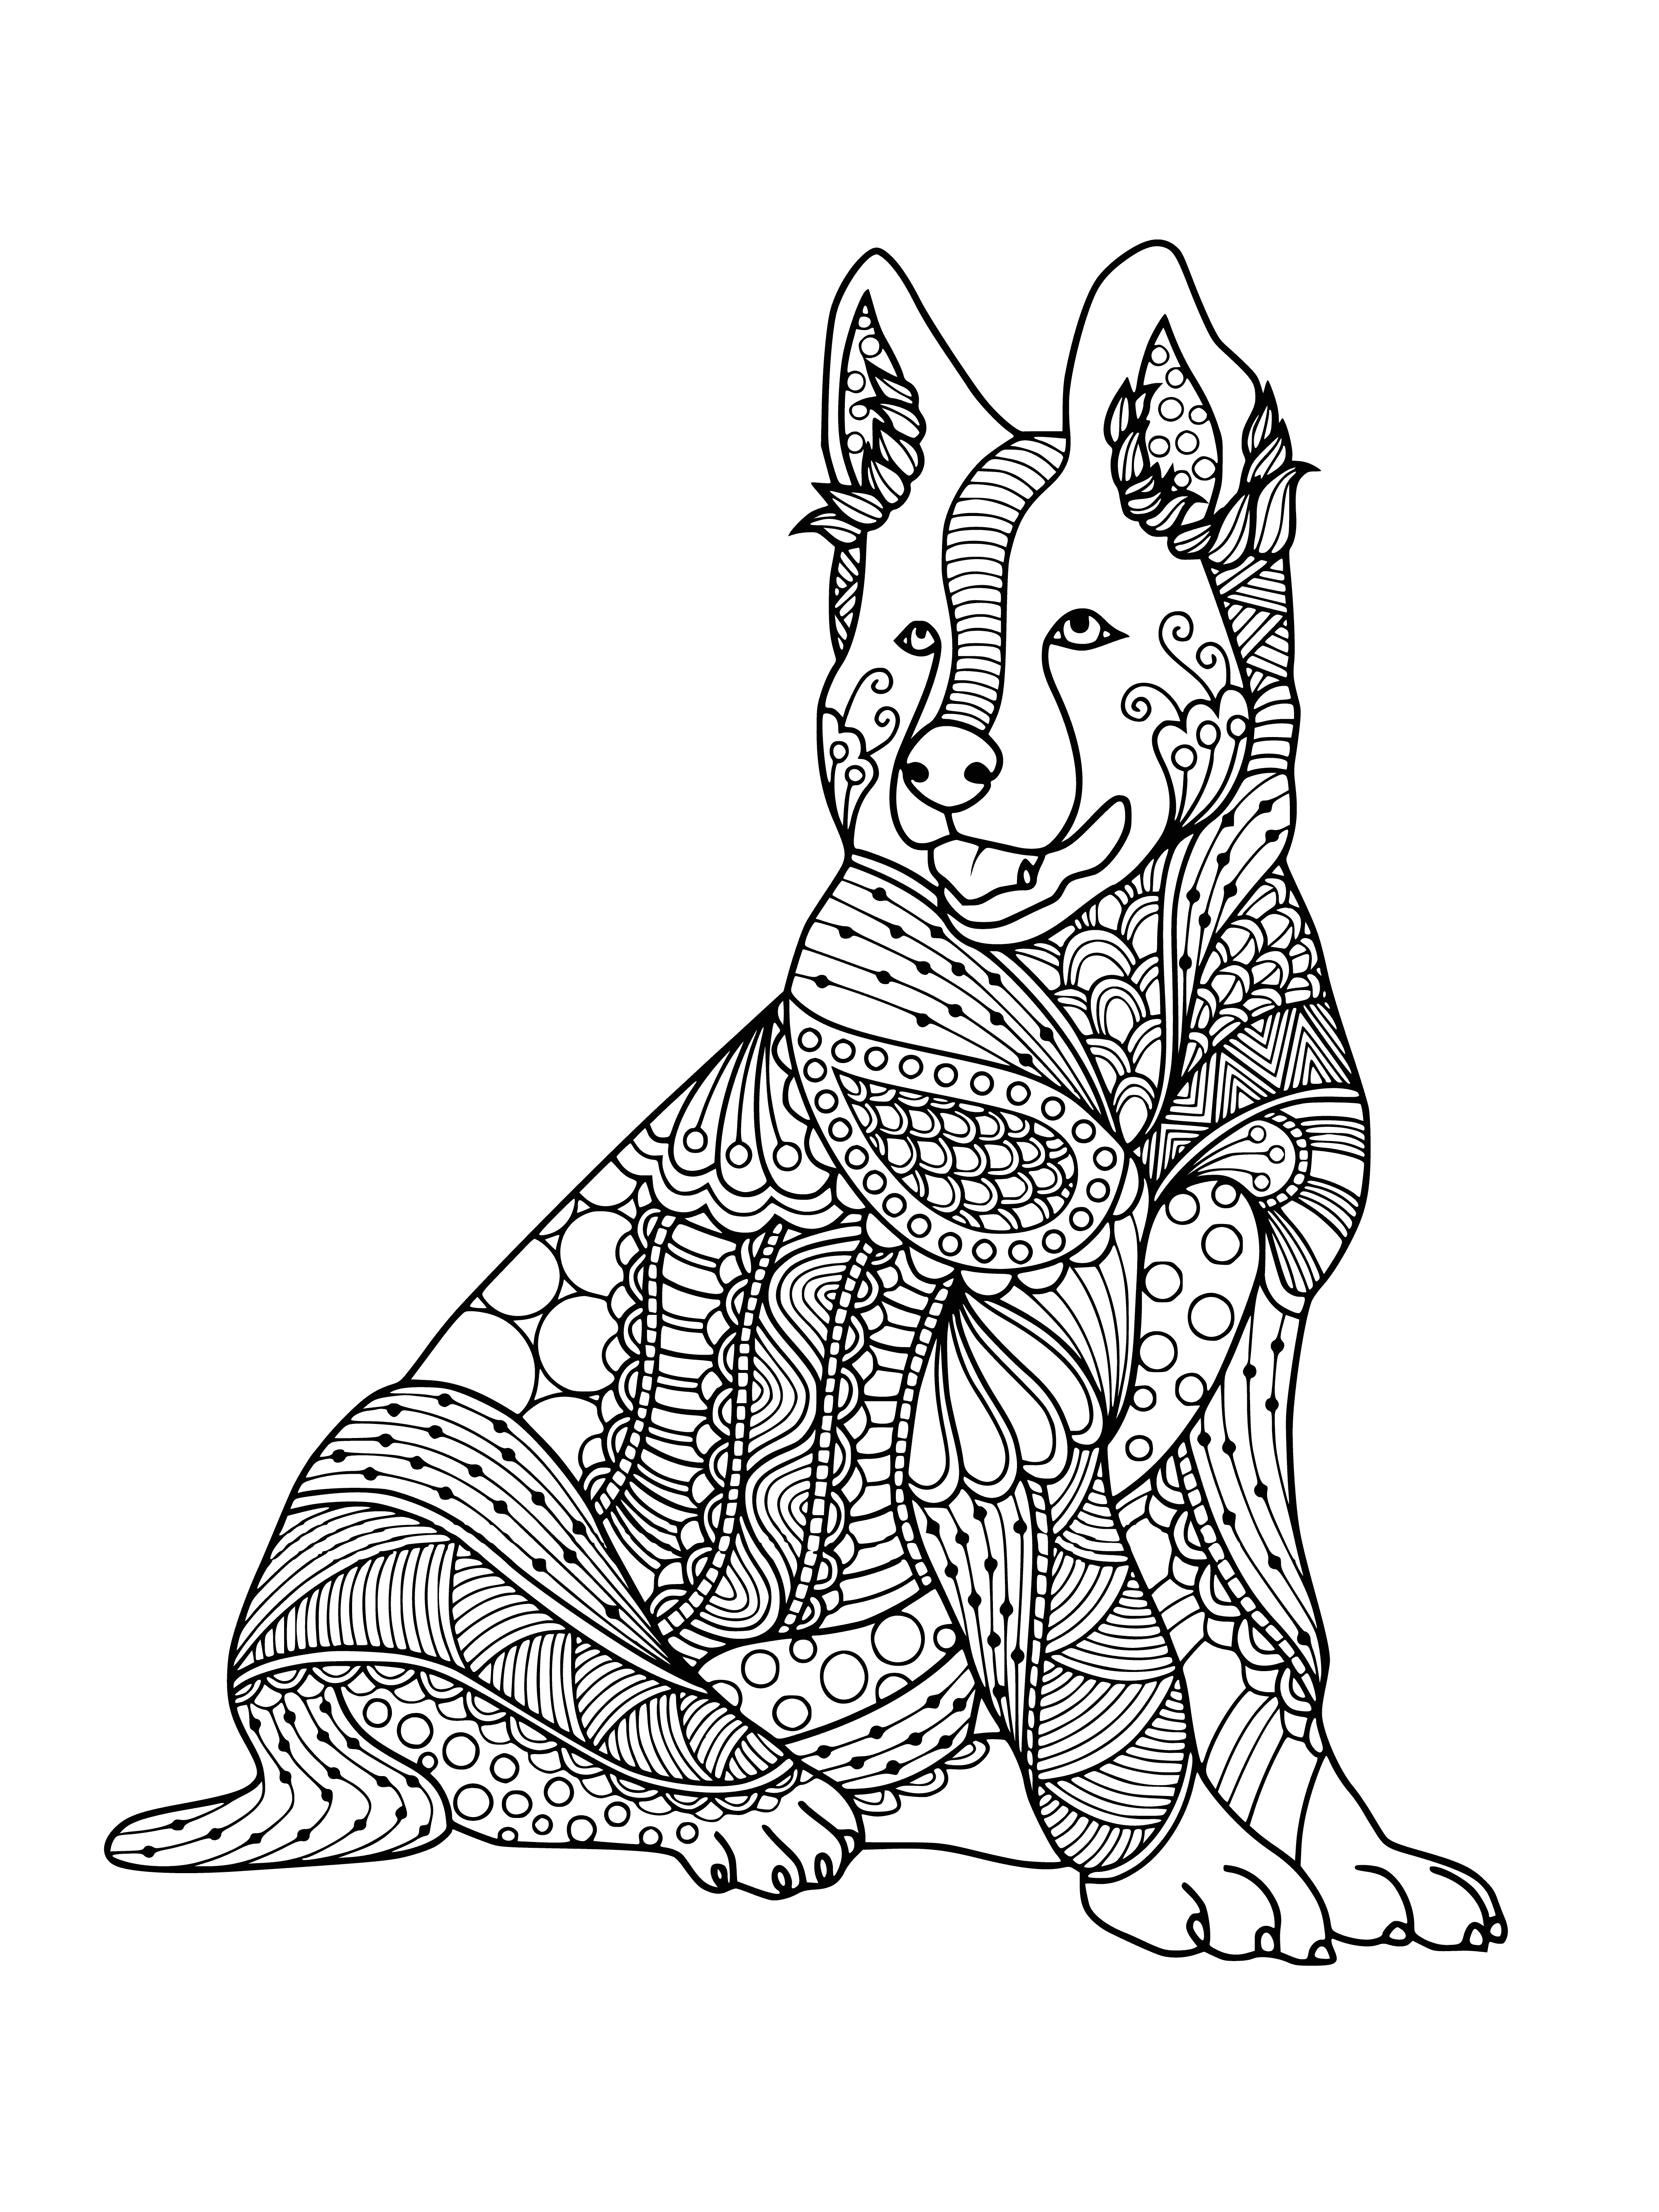 coloring page: Dog lying surrounded by flowers with blank expression and pudgy stomach.